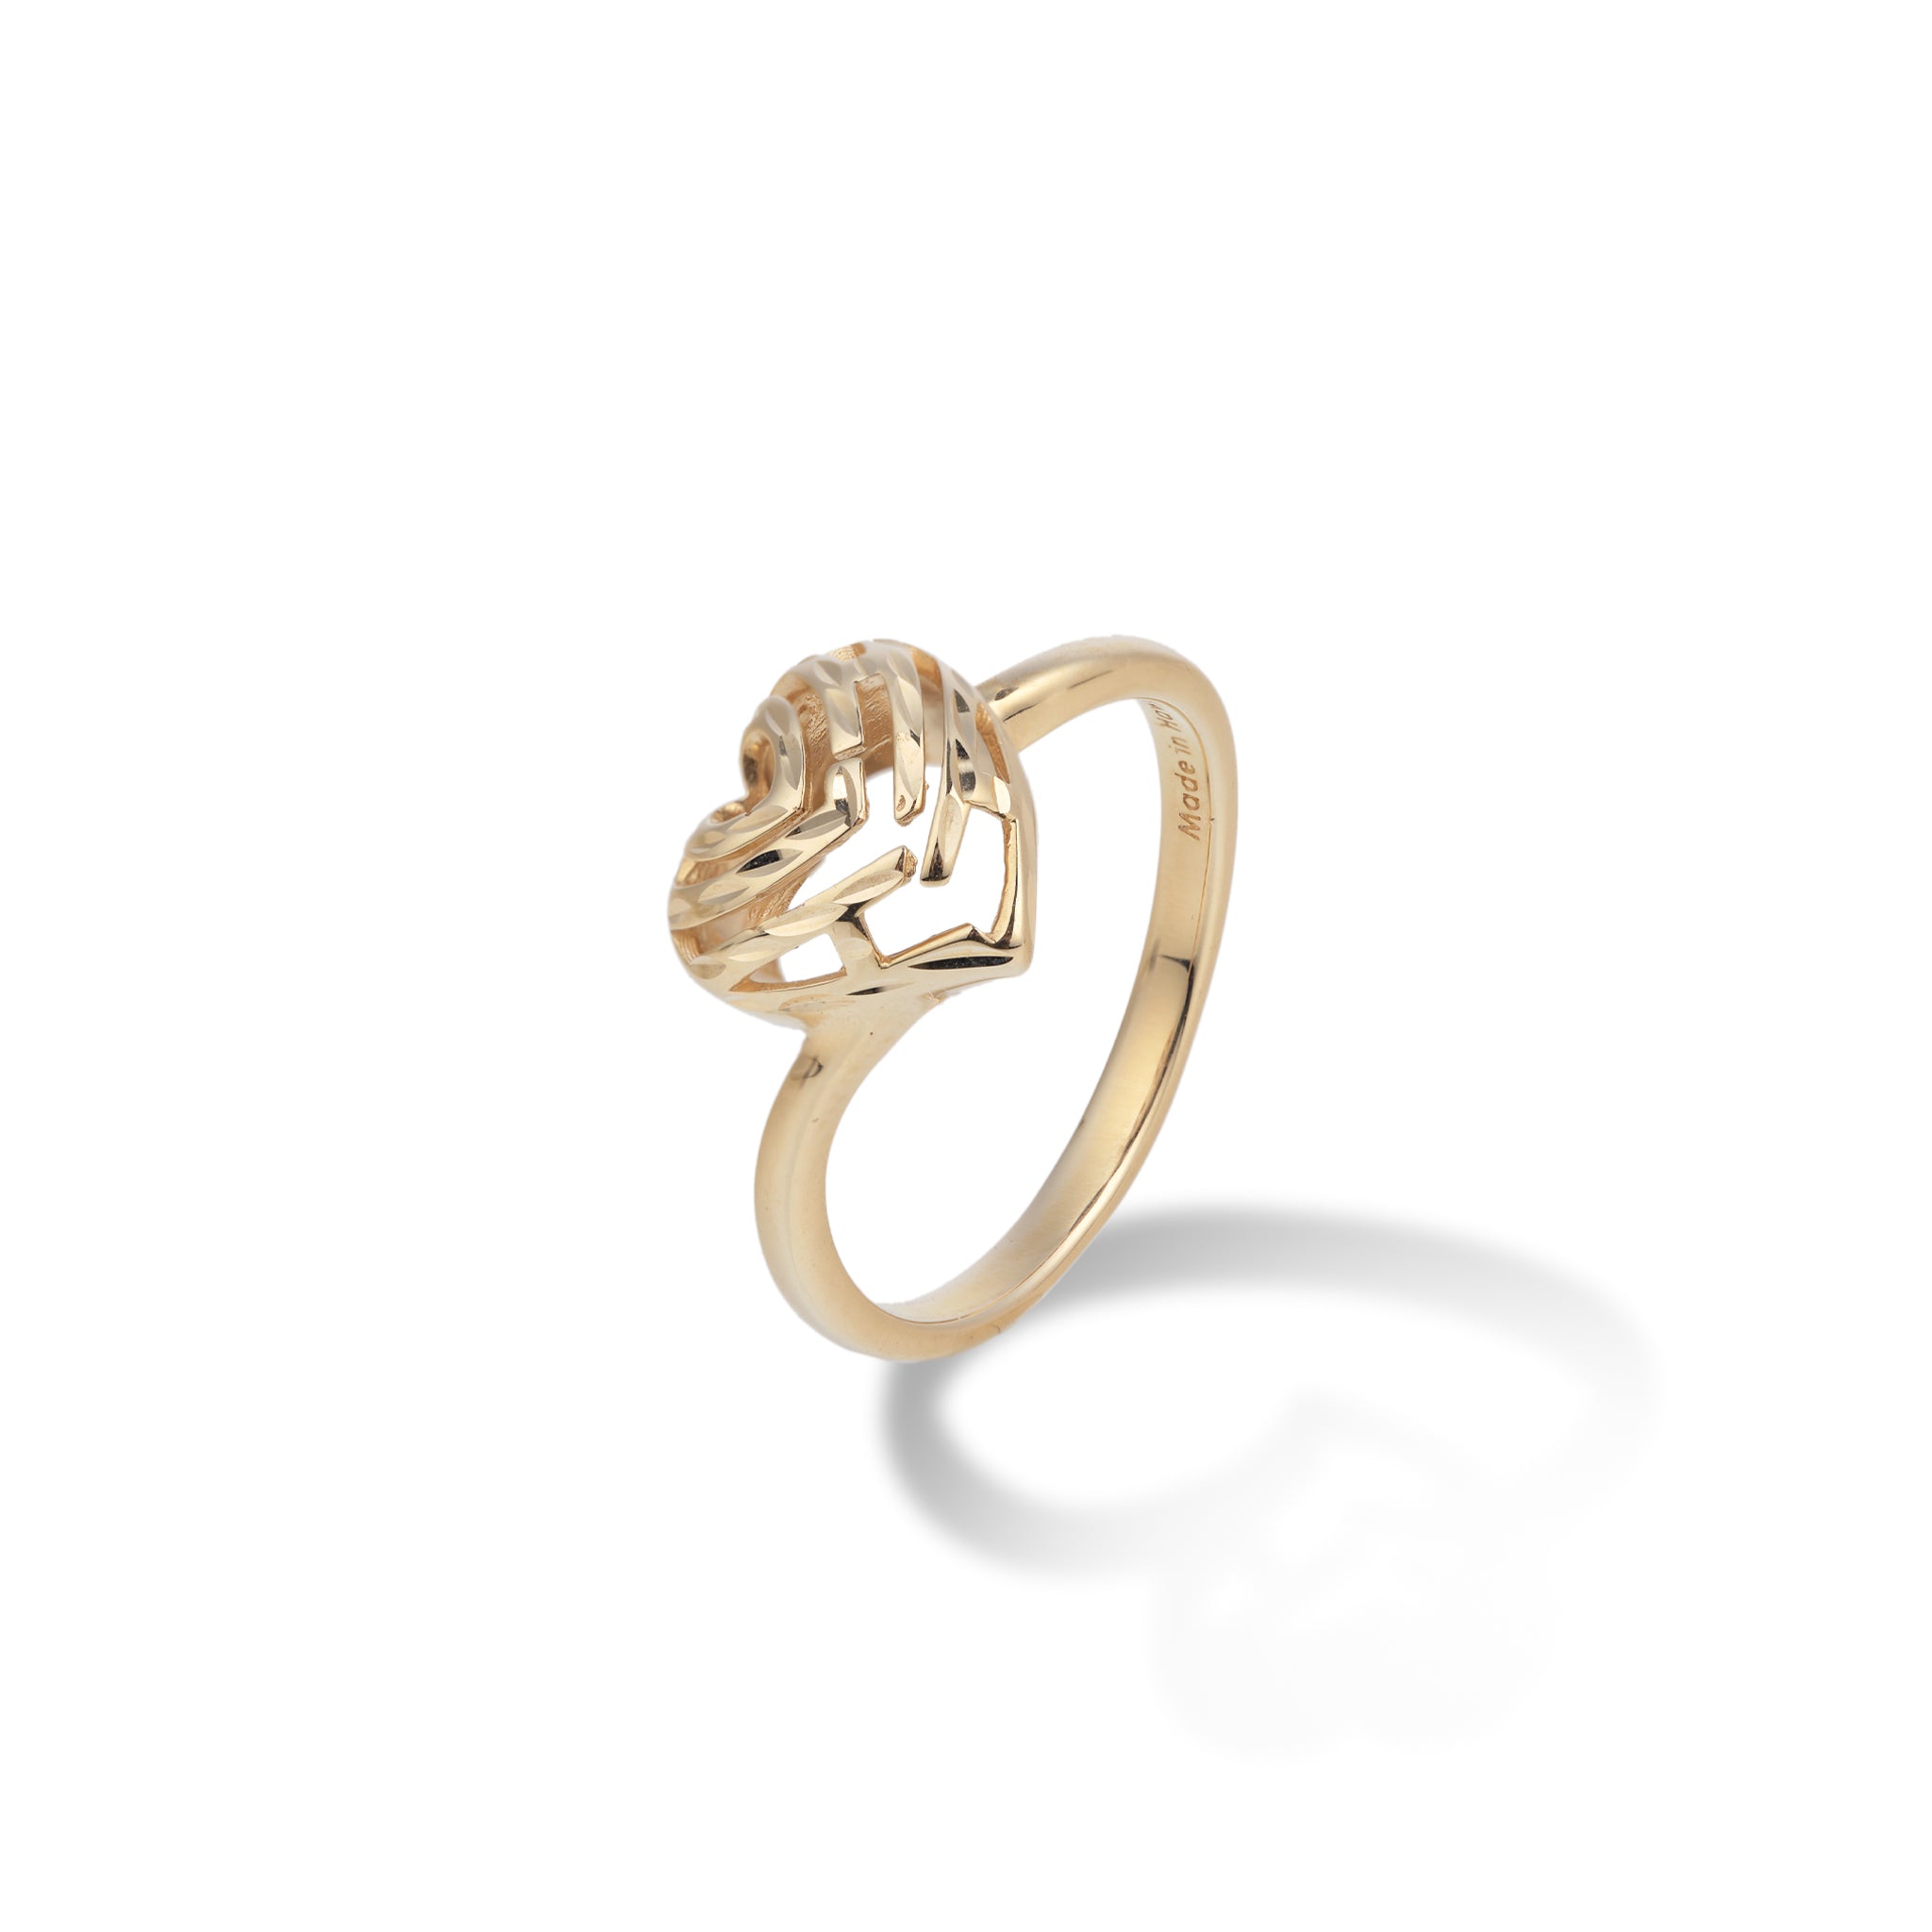 Aloha Heart Ring in Gold - 11mm